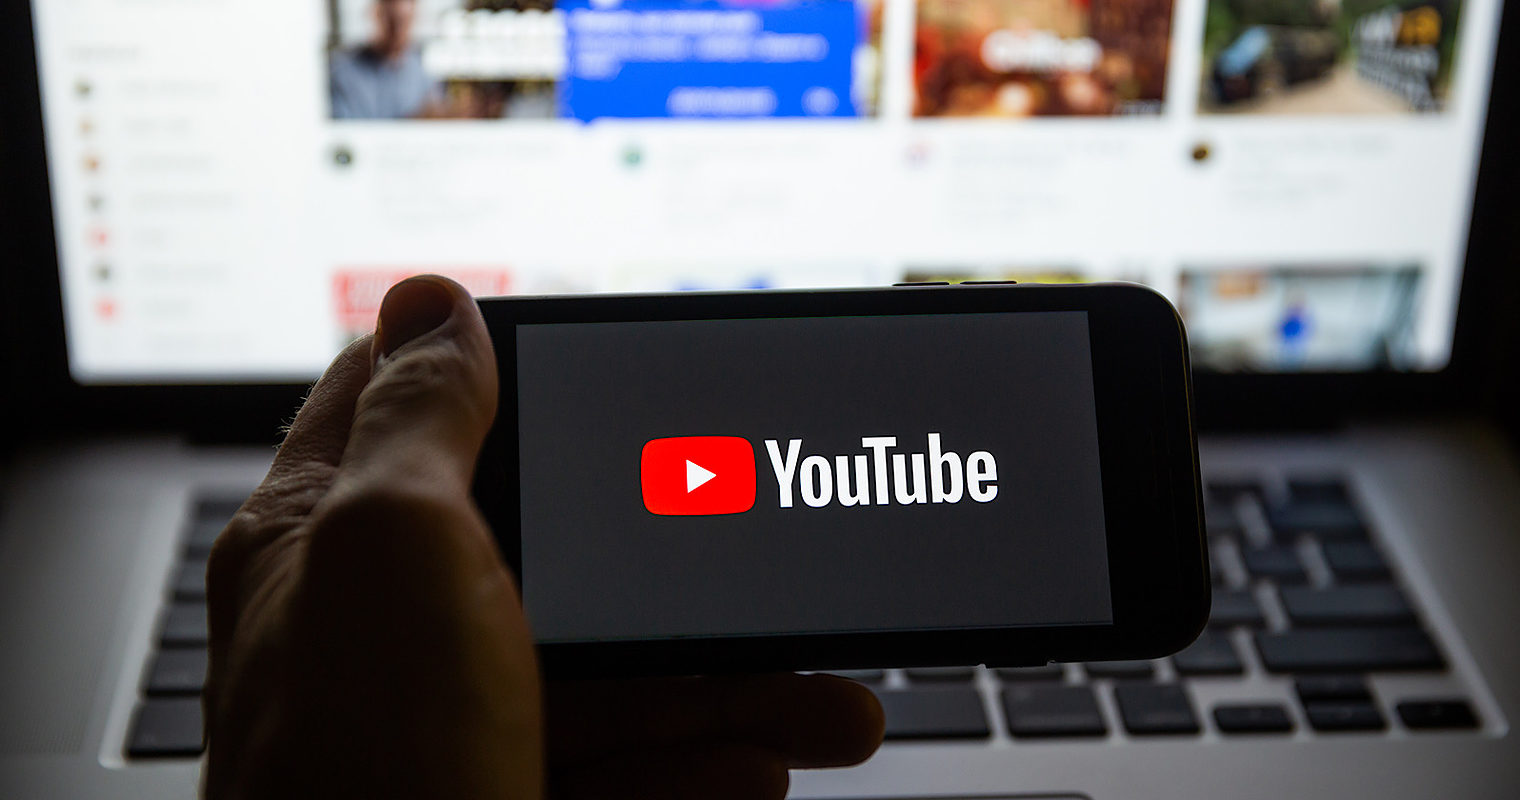 YouTube Removed Twice As Many Videos Between April and June